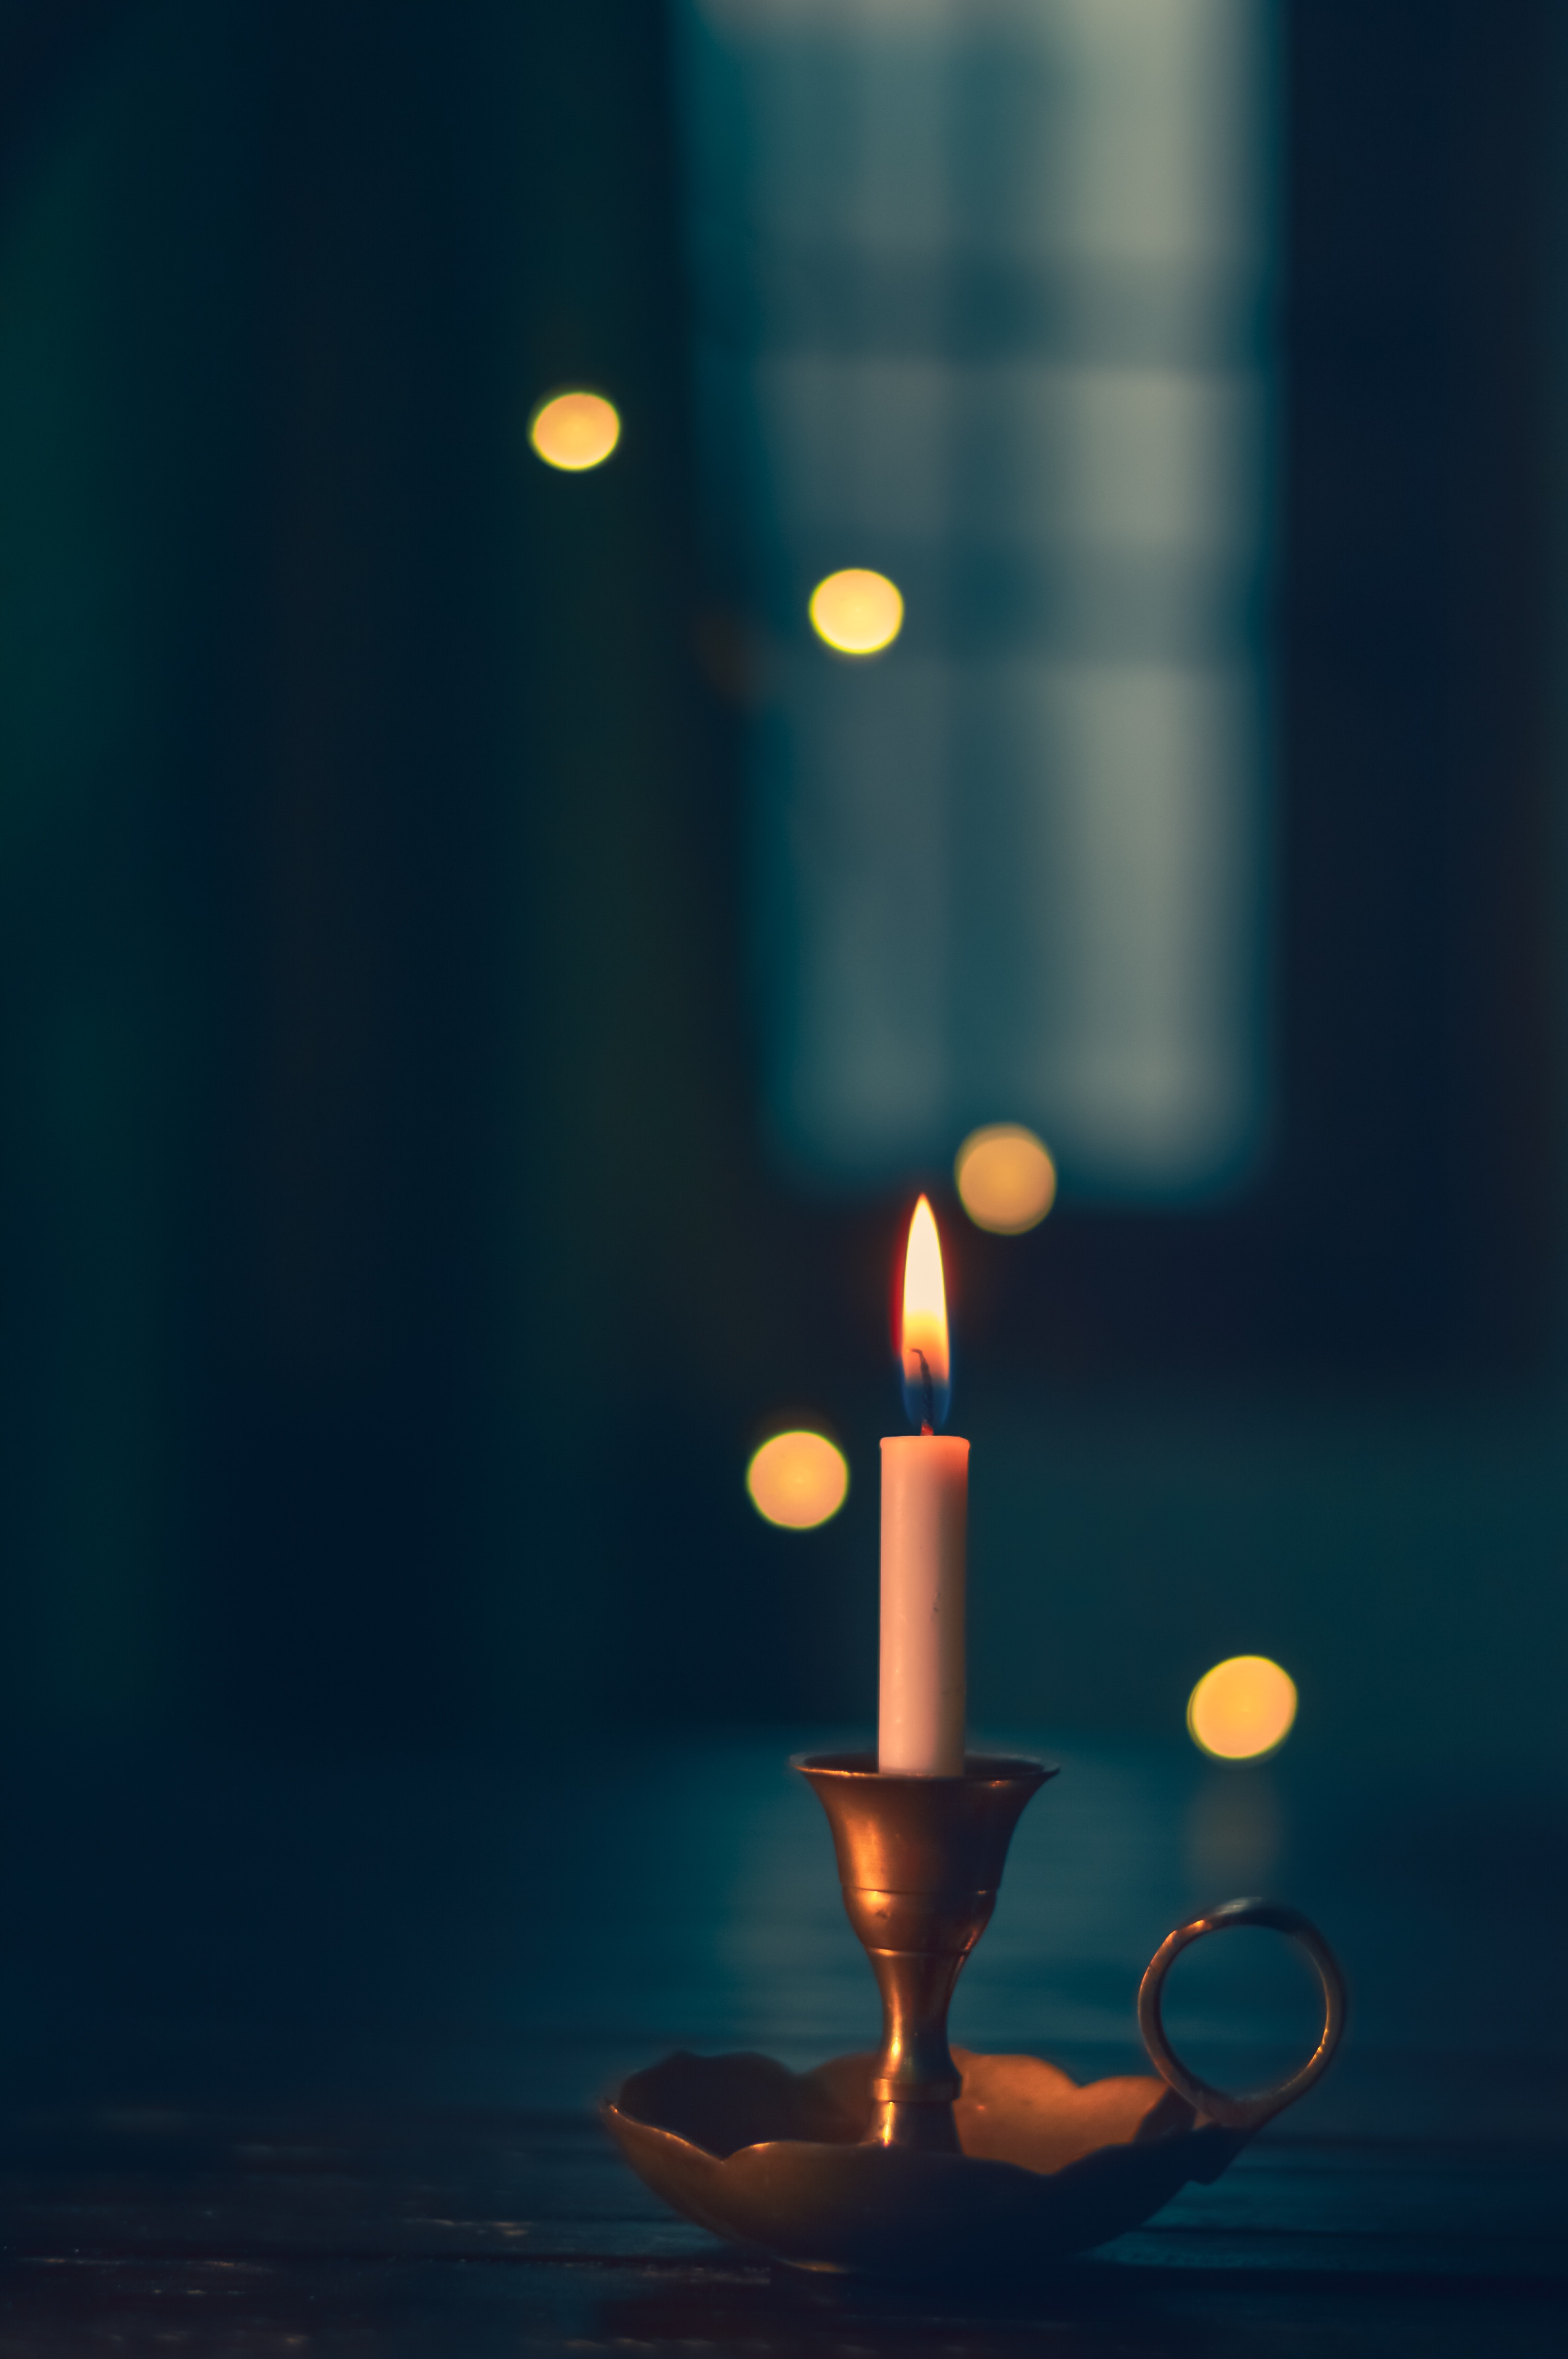 vertical wallpaper miscellanea, blur, wax, candle, candlestick, fire, miscellaneous, smooth, wick